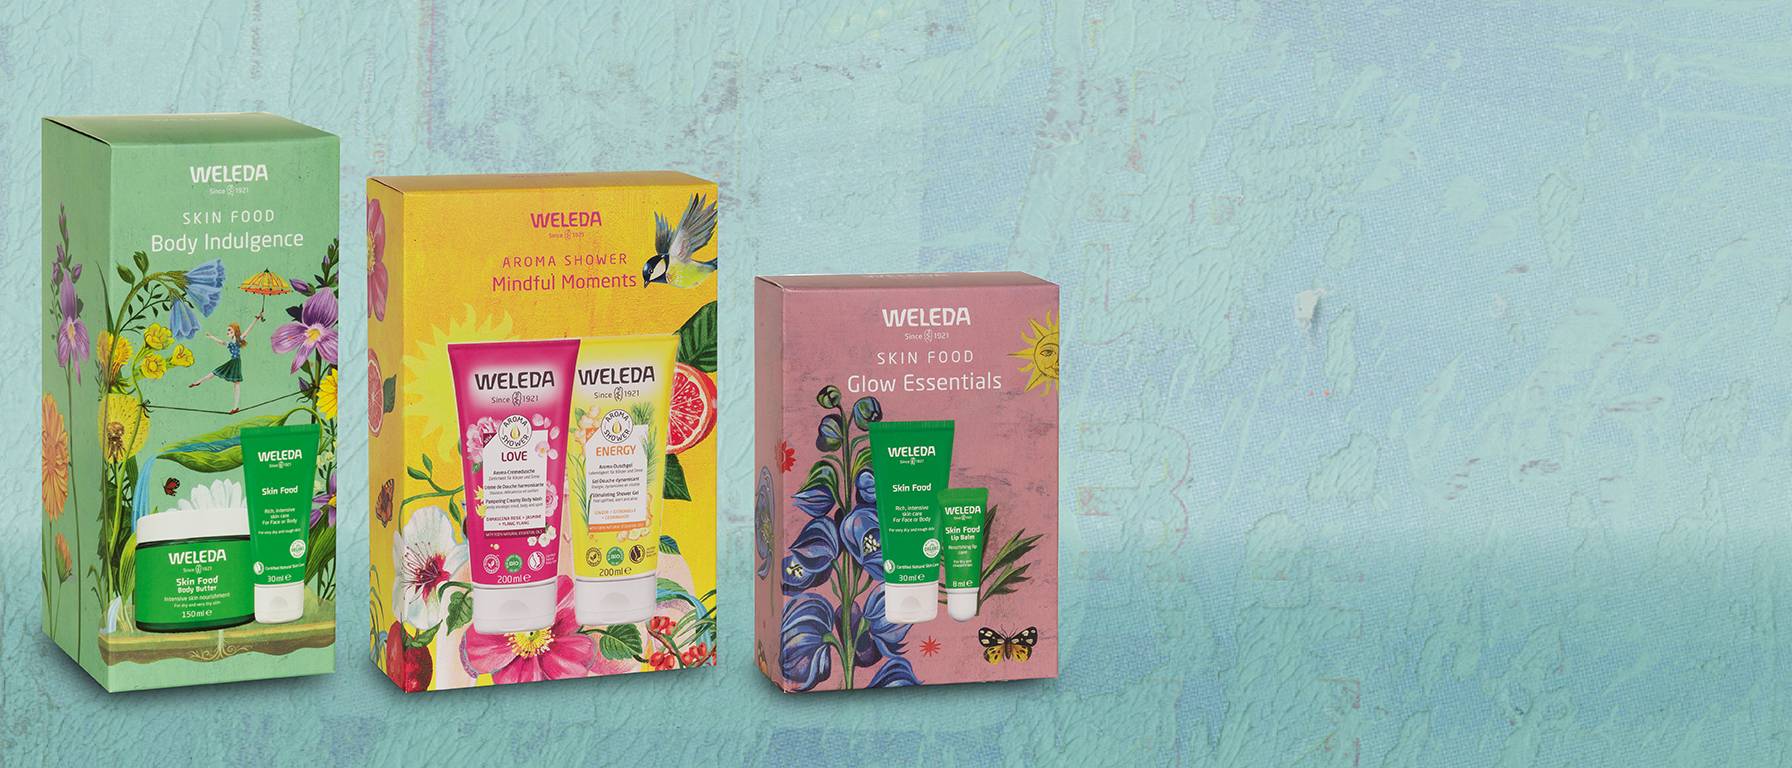 Embrace the wonder with Weleda’s limited edition holiday gift packs.